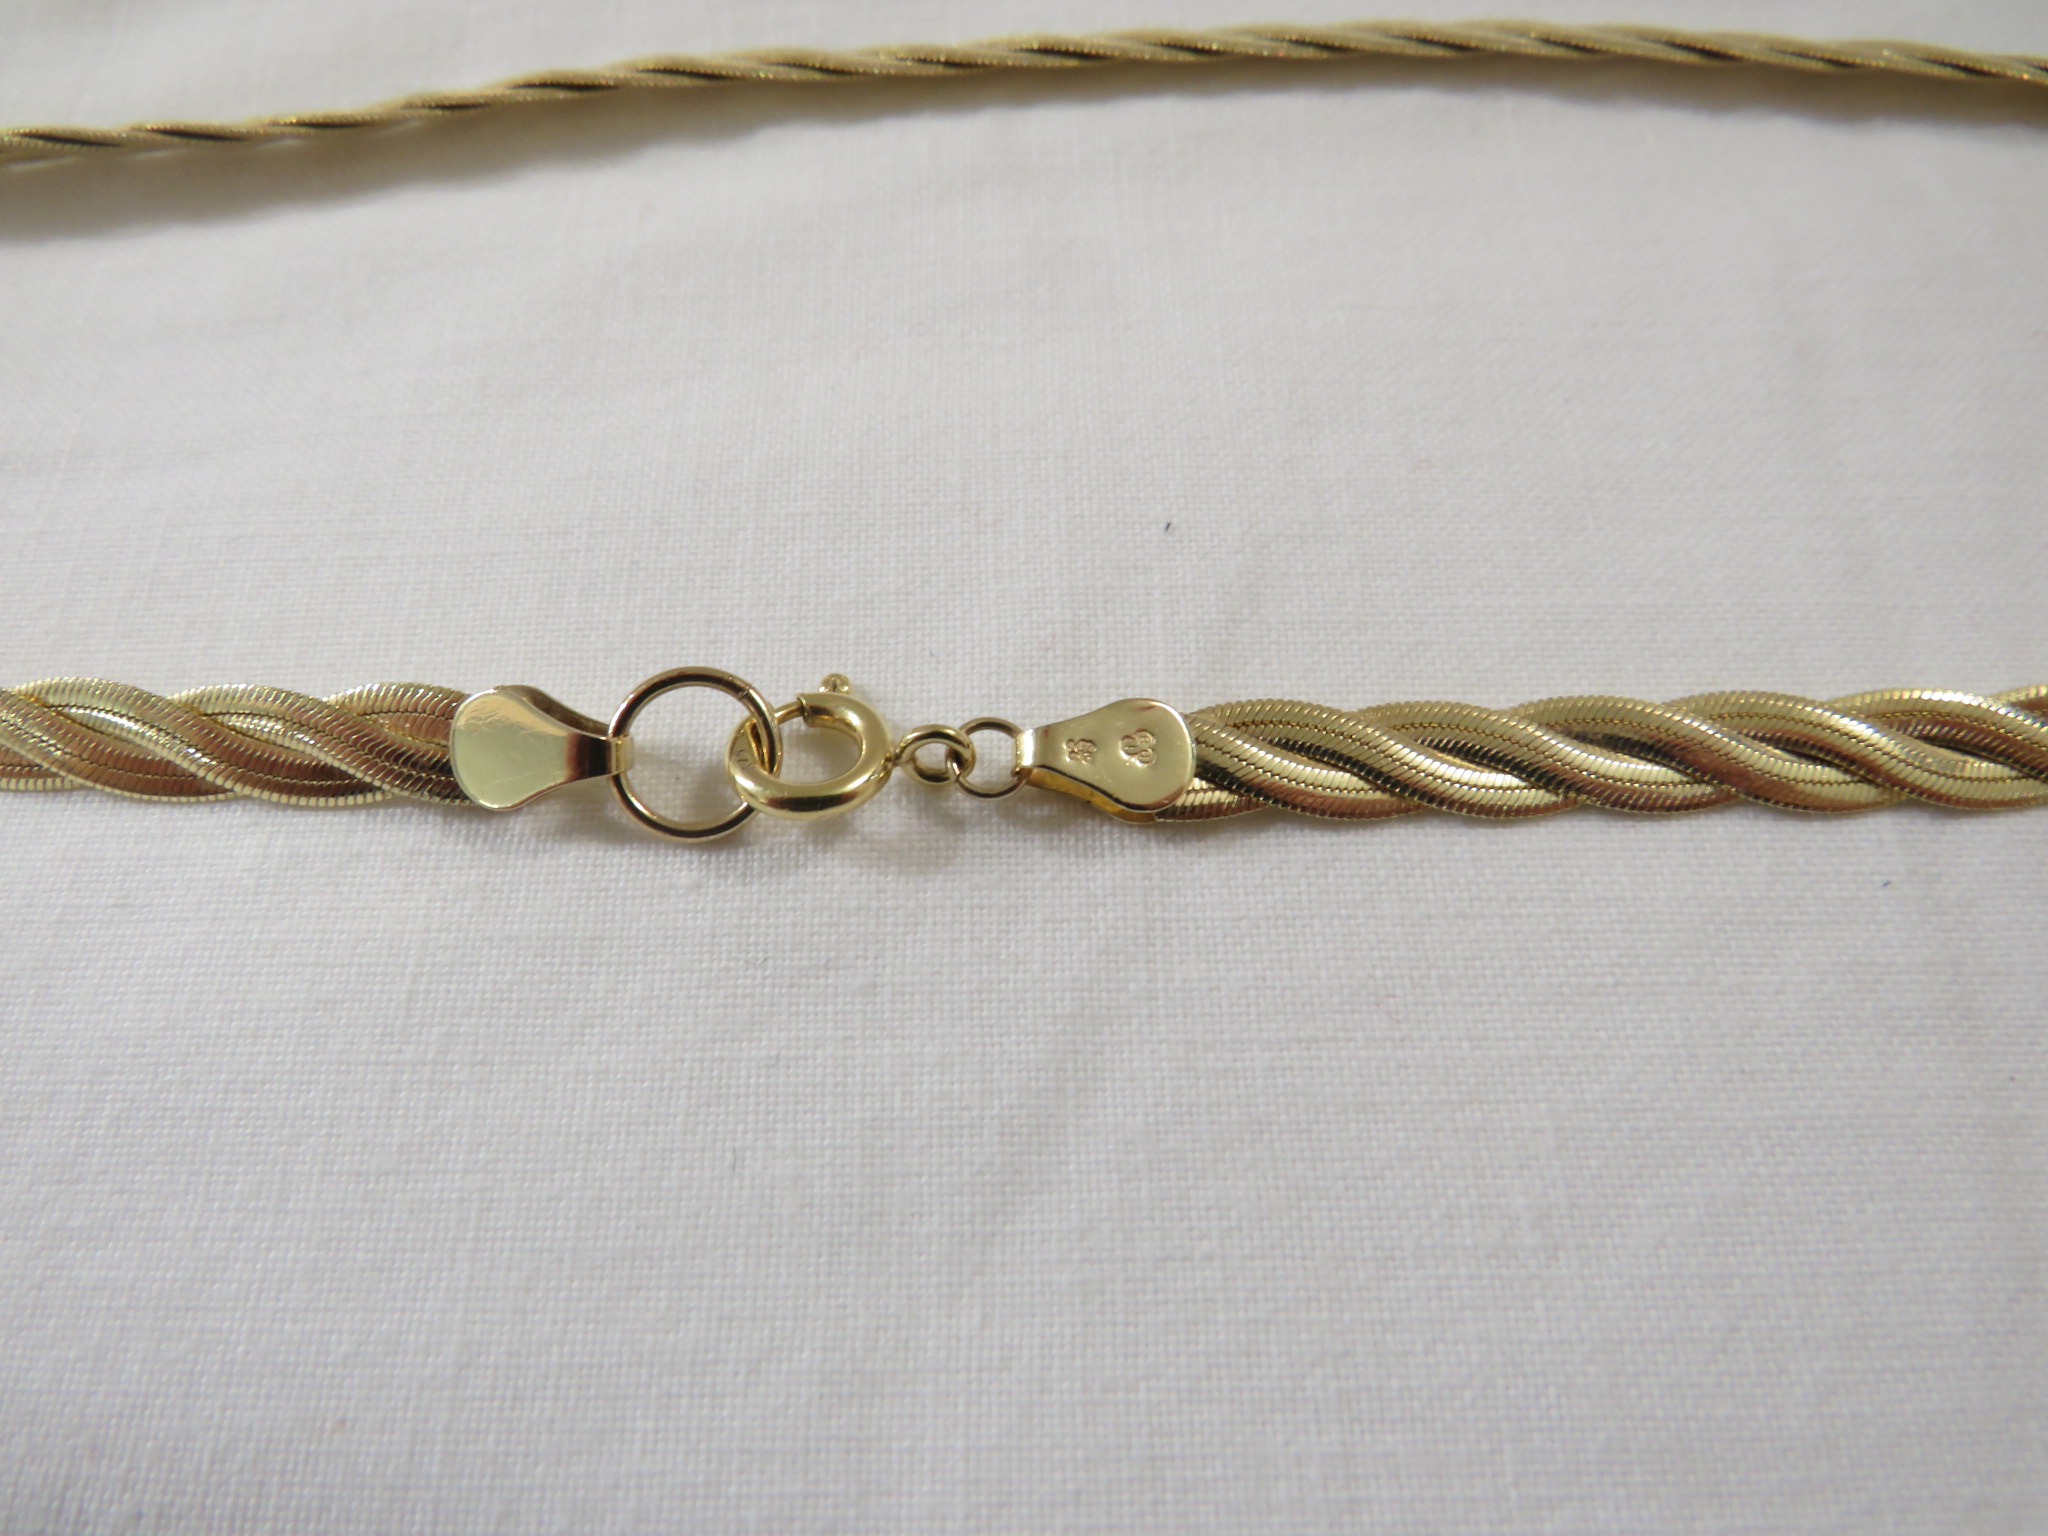 9ct gold double twist necklace, length 43cm, foreign stamped marks, 19.2g, presented in a - Image 3 of 3